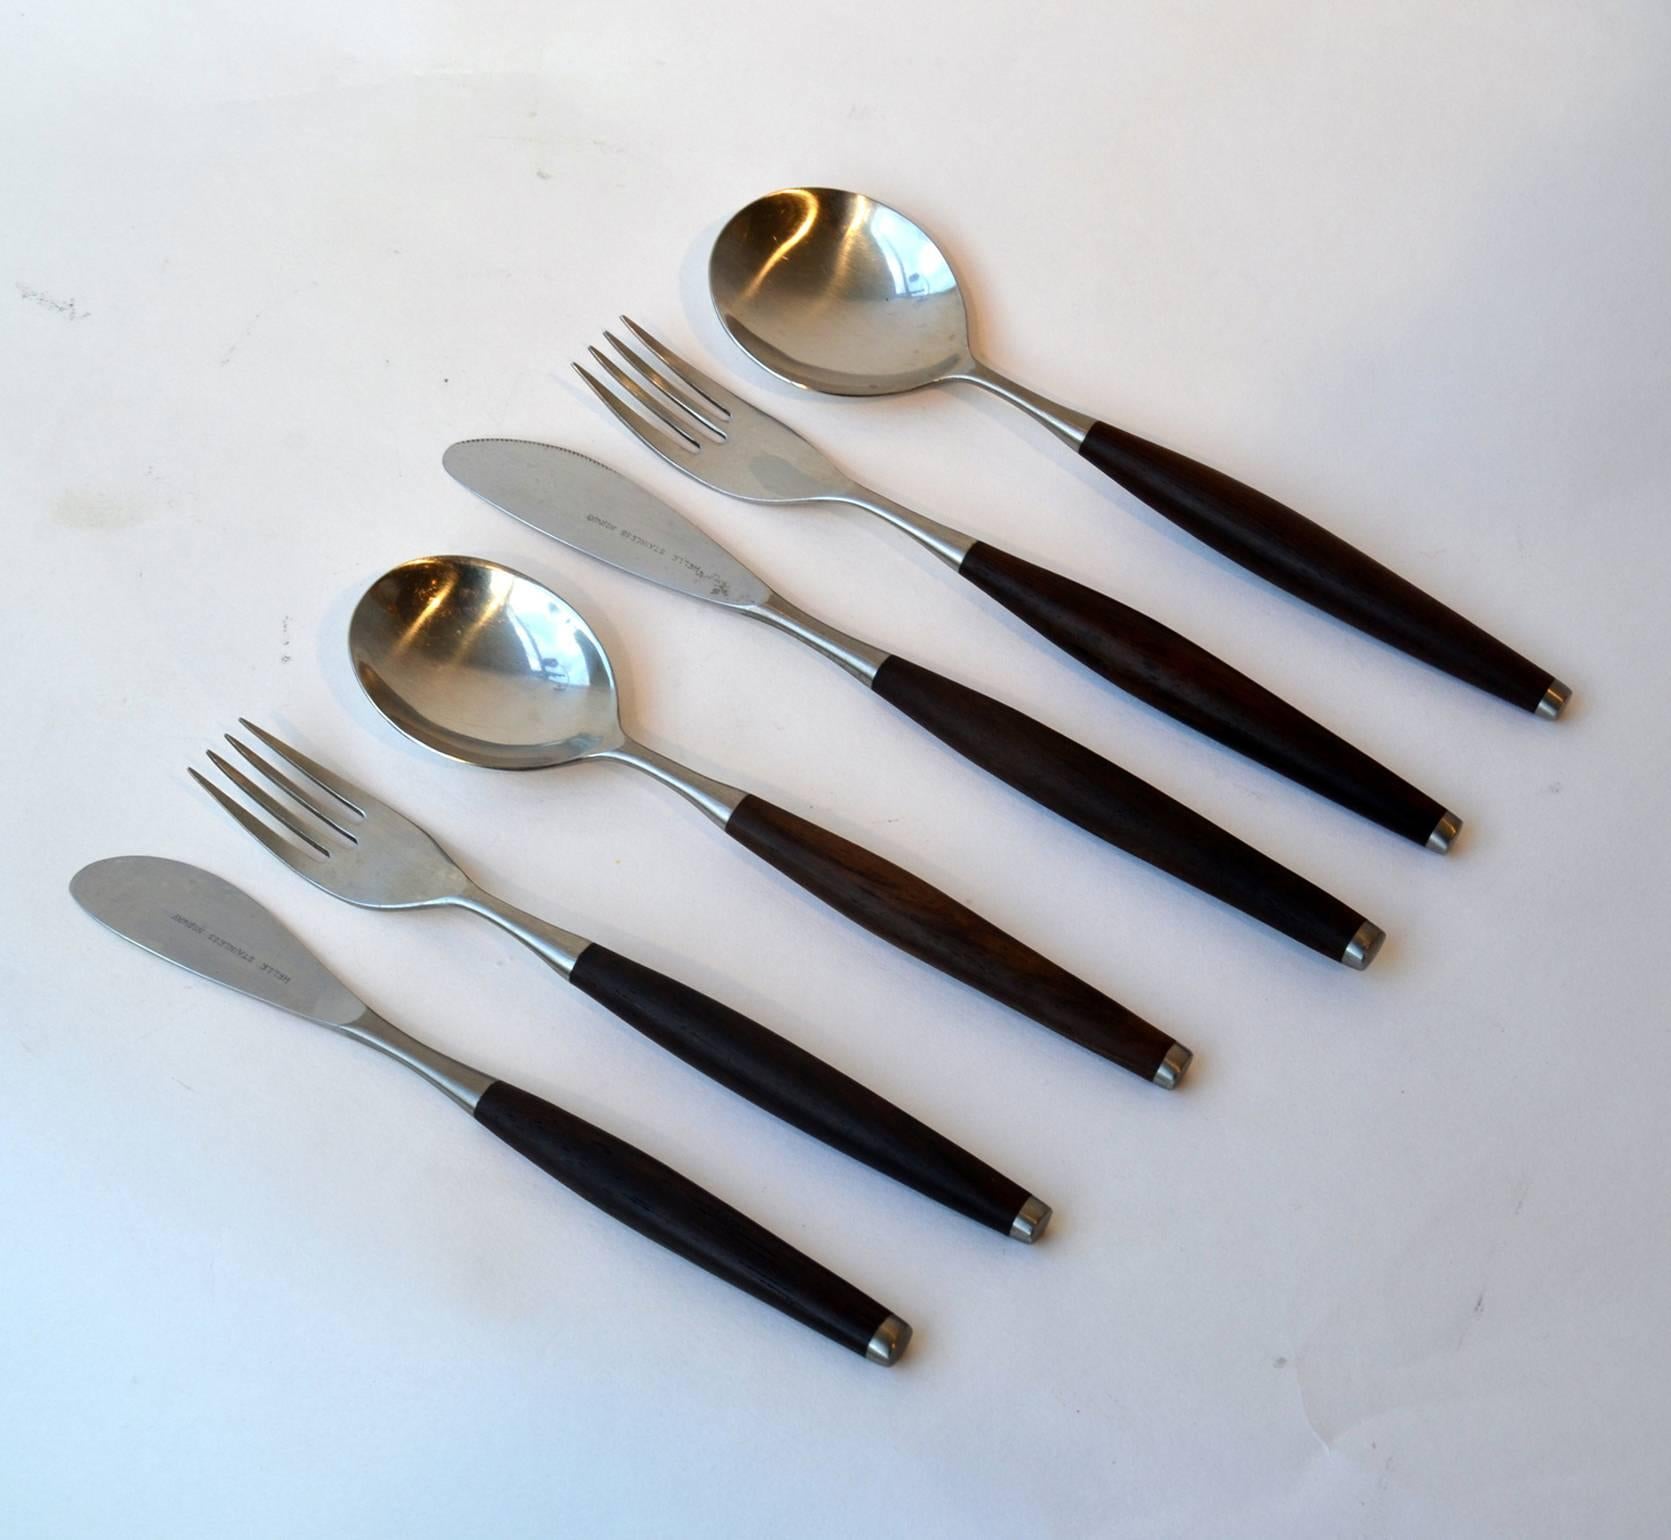 Wallin of Sweden 'Safir' canteen cutlery for six place setting. 46 pieces of Mid-Century flatware in Stainless steel and teak. Six person place settings consisting of, six soup spoons, dinner forks, knifes and desert spoons, six breakfast forks,